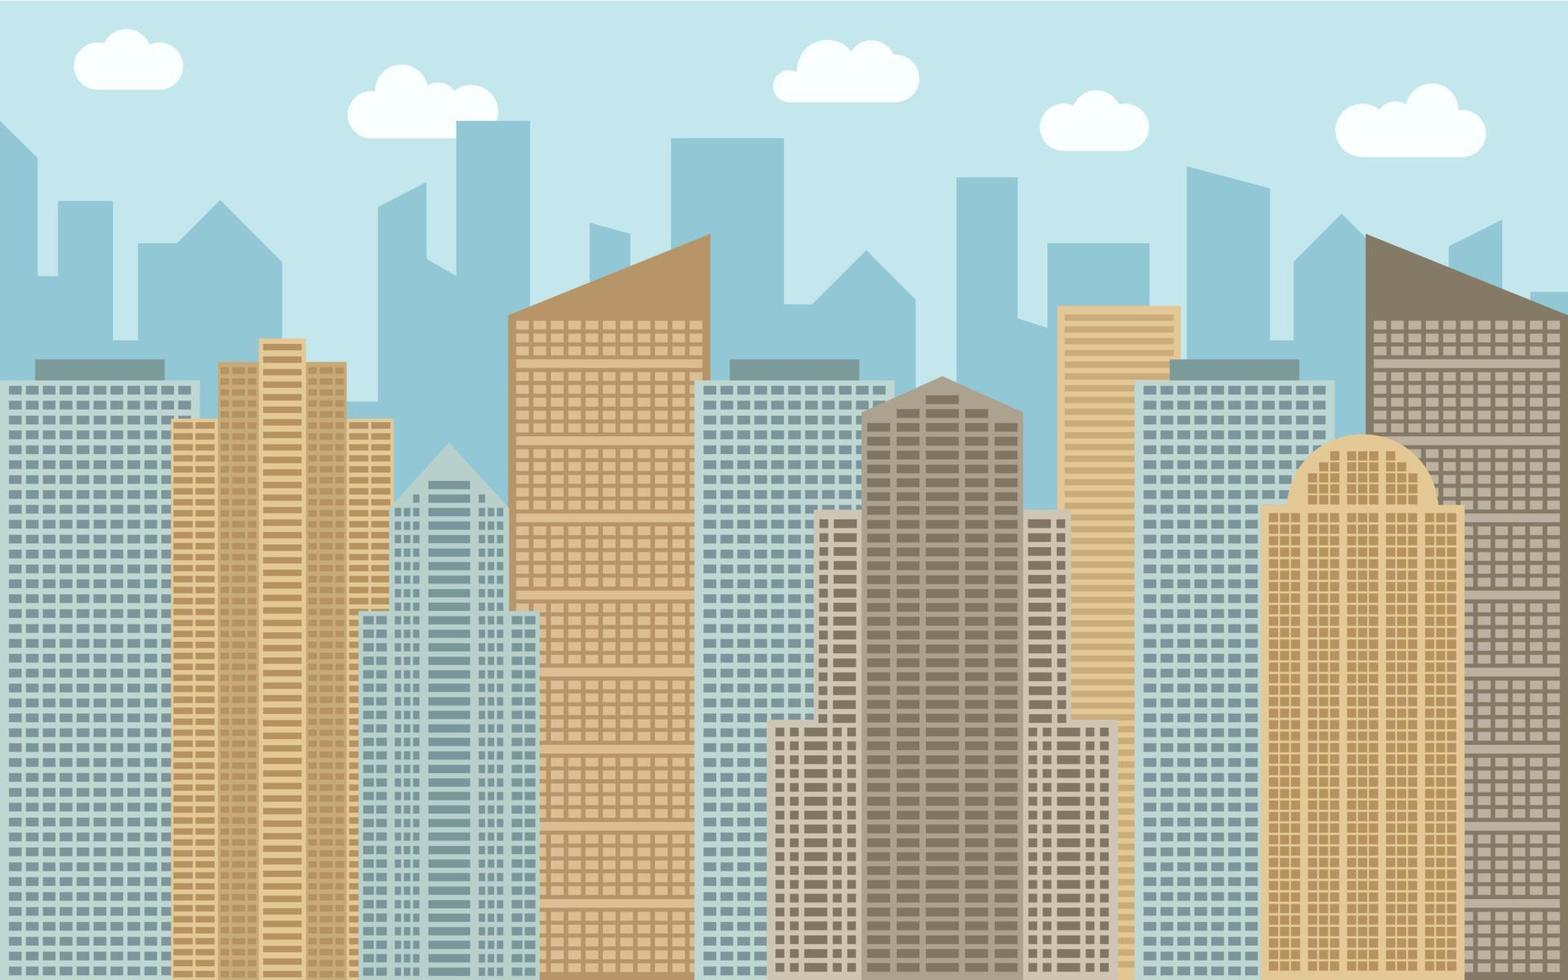 Vector urban landscape illustration. Street view with cityscape, skyscrapers and modern buildings at sunny day. City space in flat style background concept.